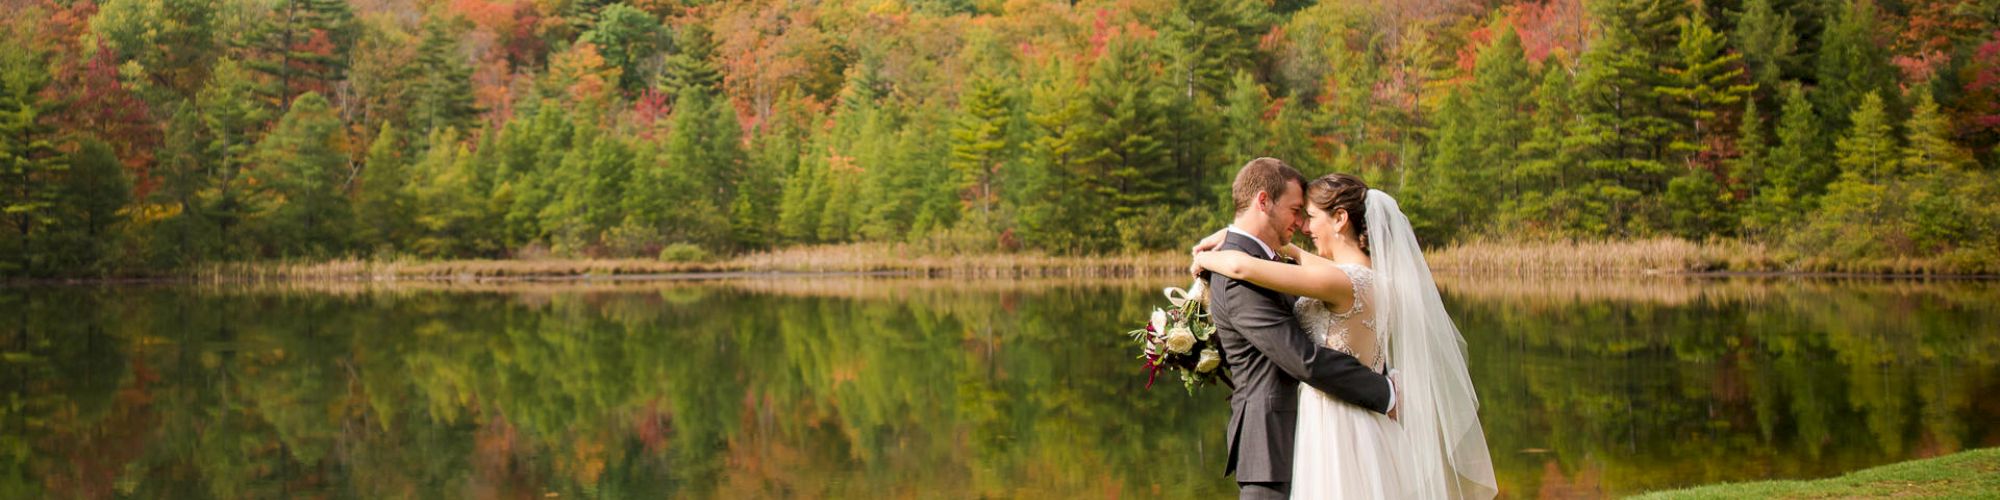 A couple in wedding attire embraces by a serene lake with a backdrop of vibrant, multicolored autumn foliage on a mountainside in the distance.